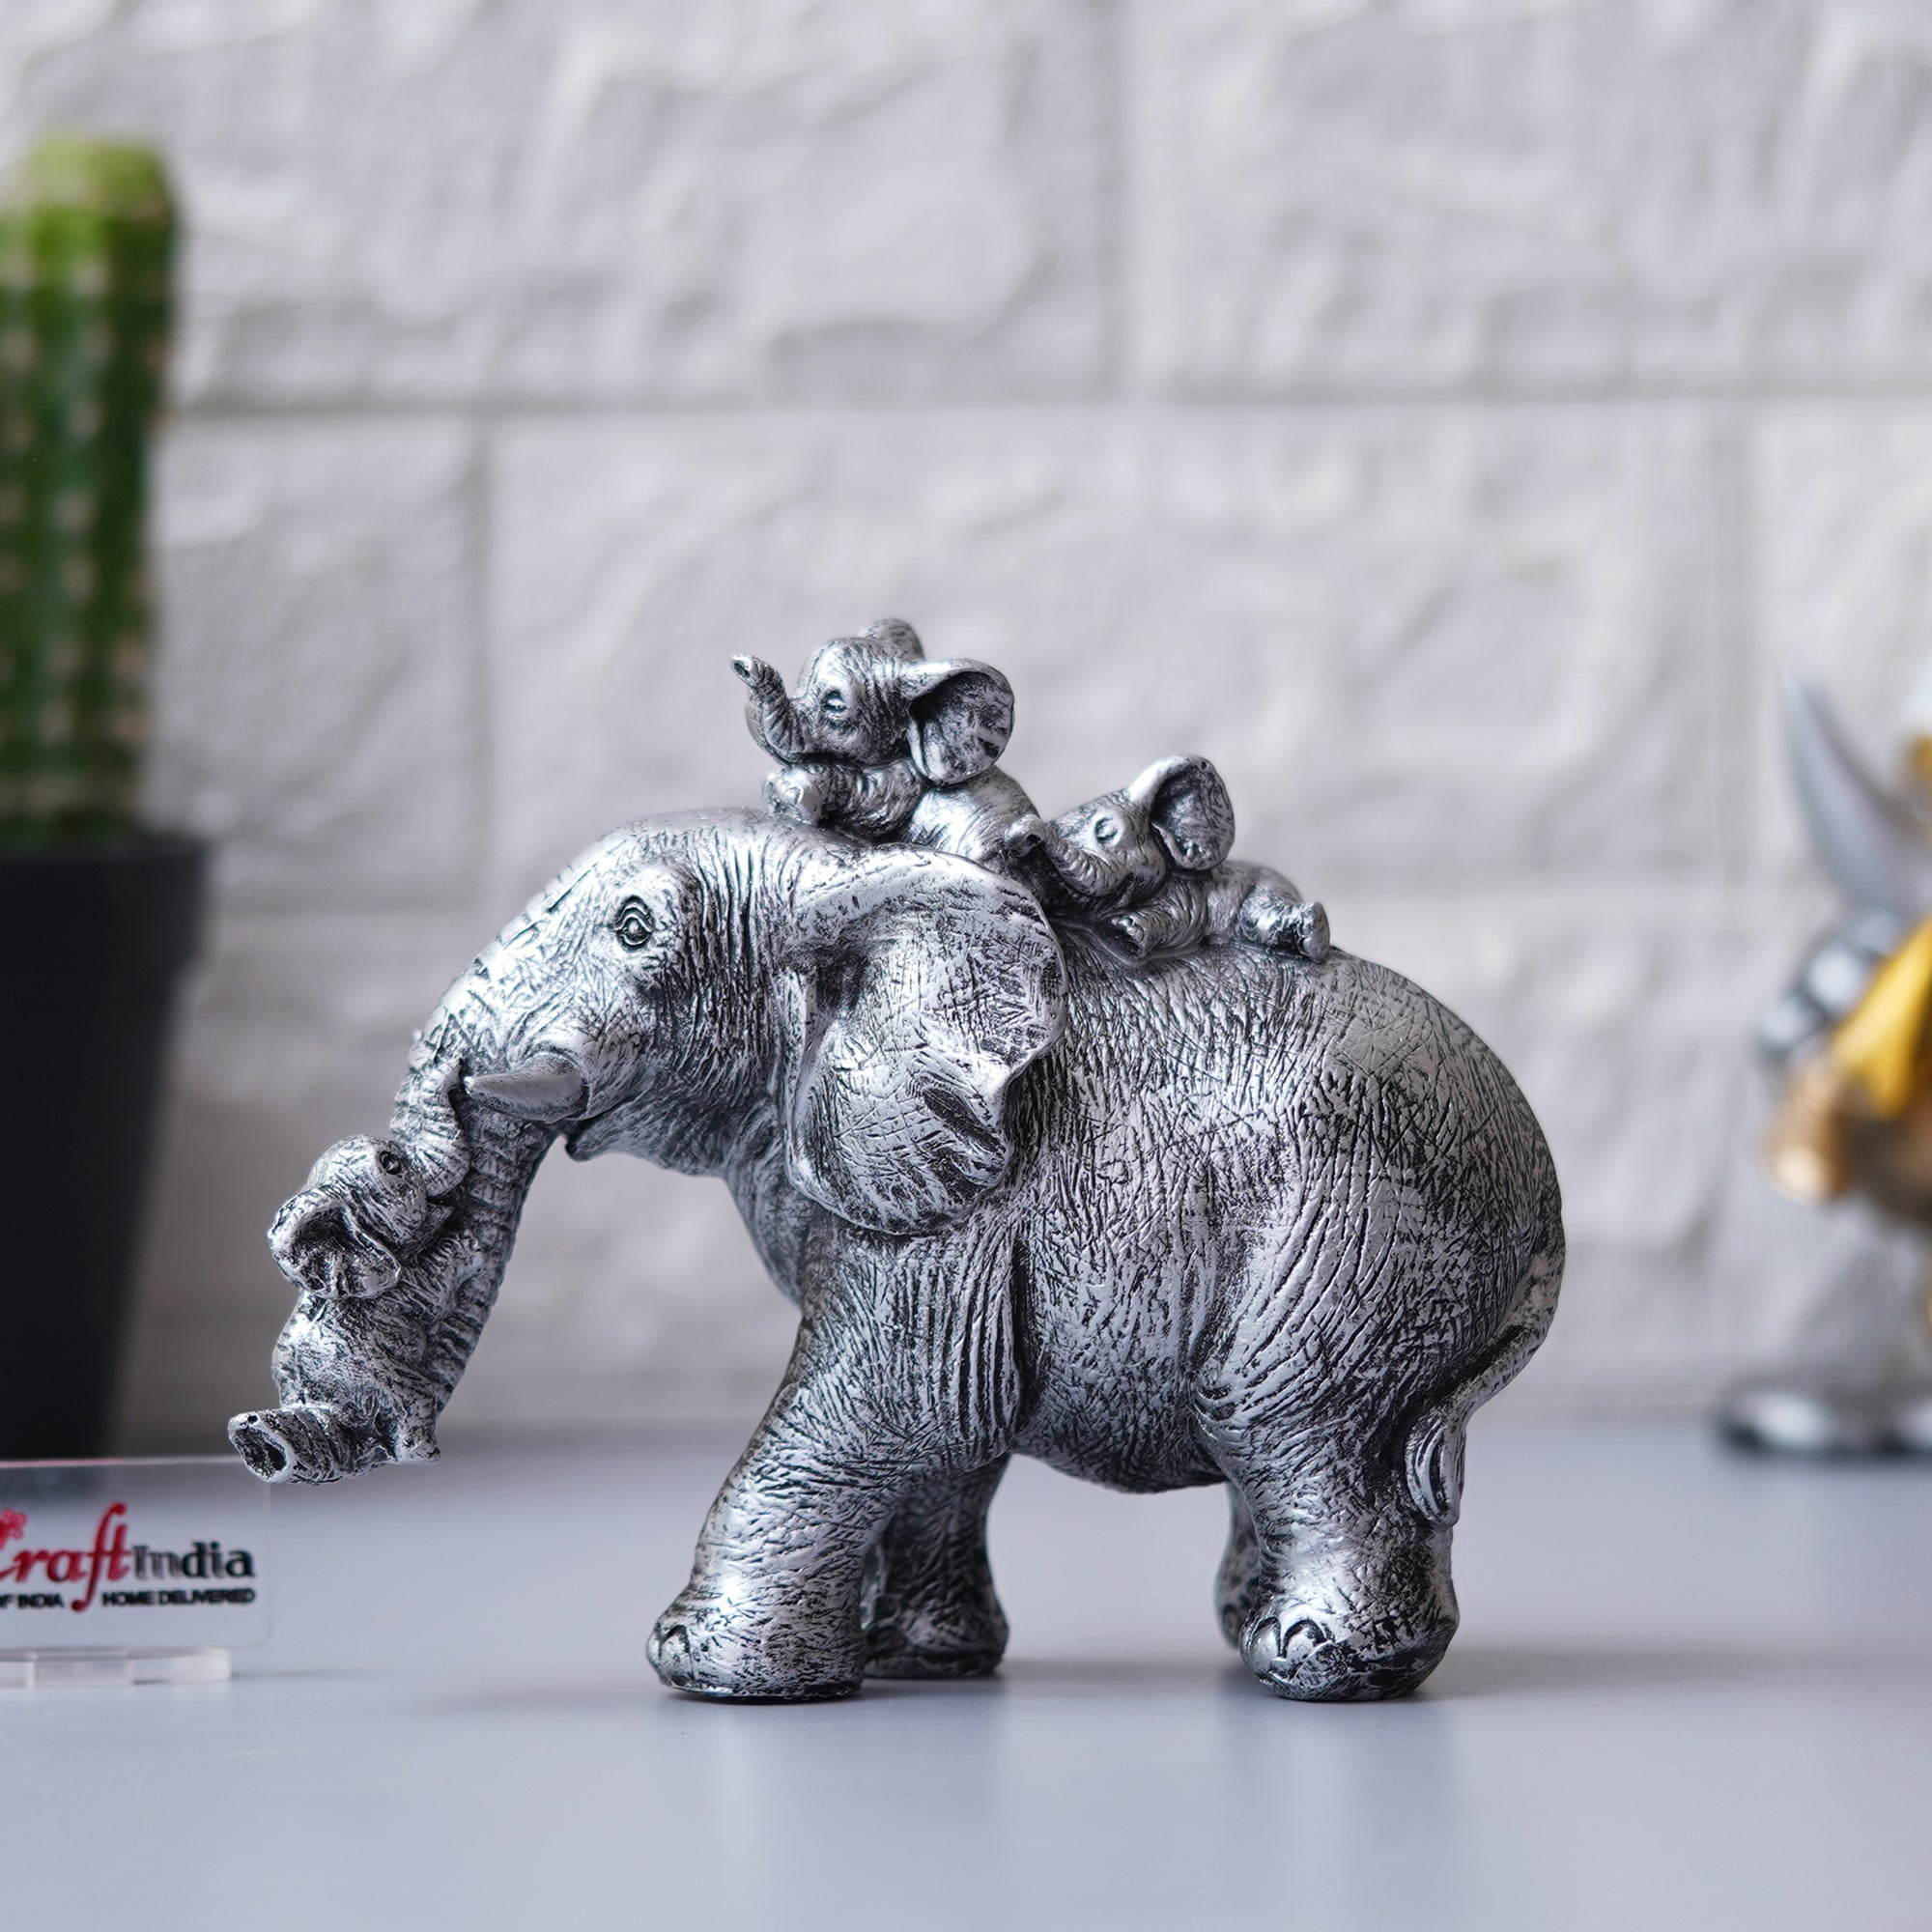 Cute Silver Elephant Statue Carries Three Calves on Its Back and Trunk